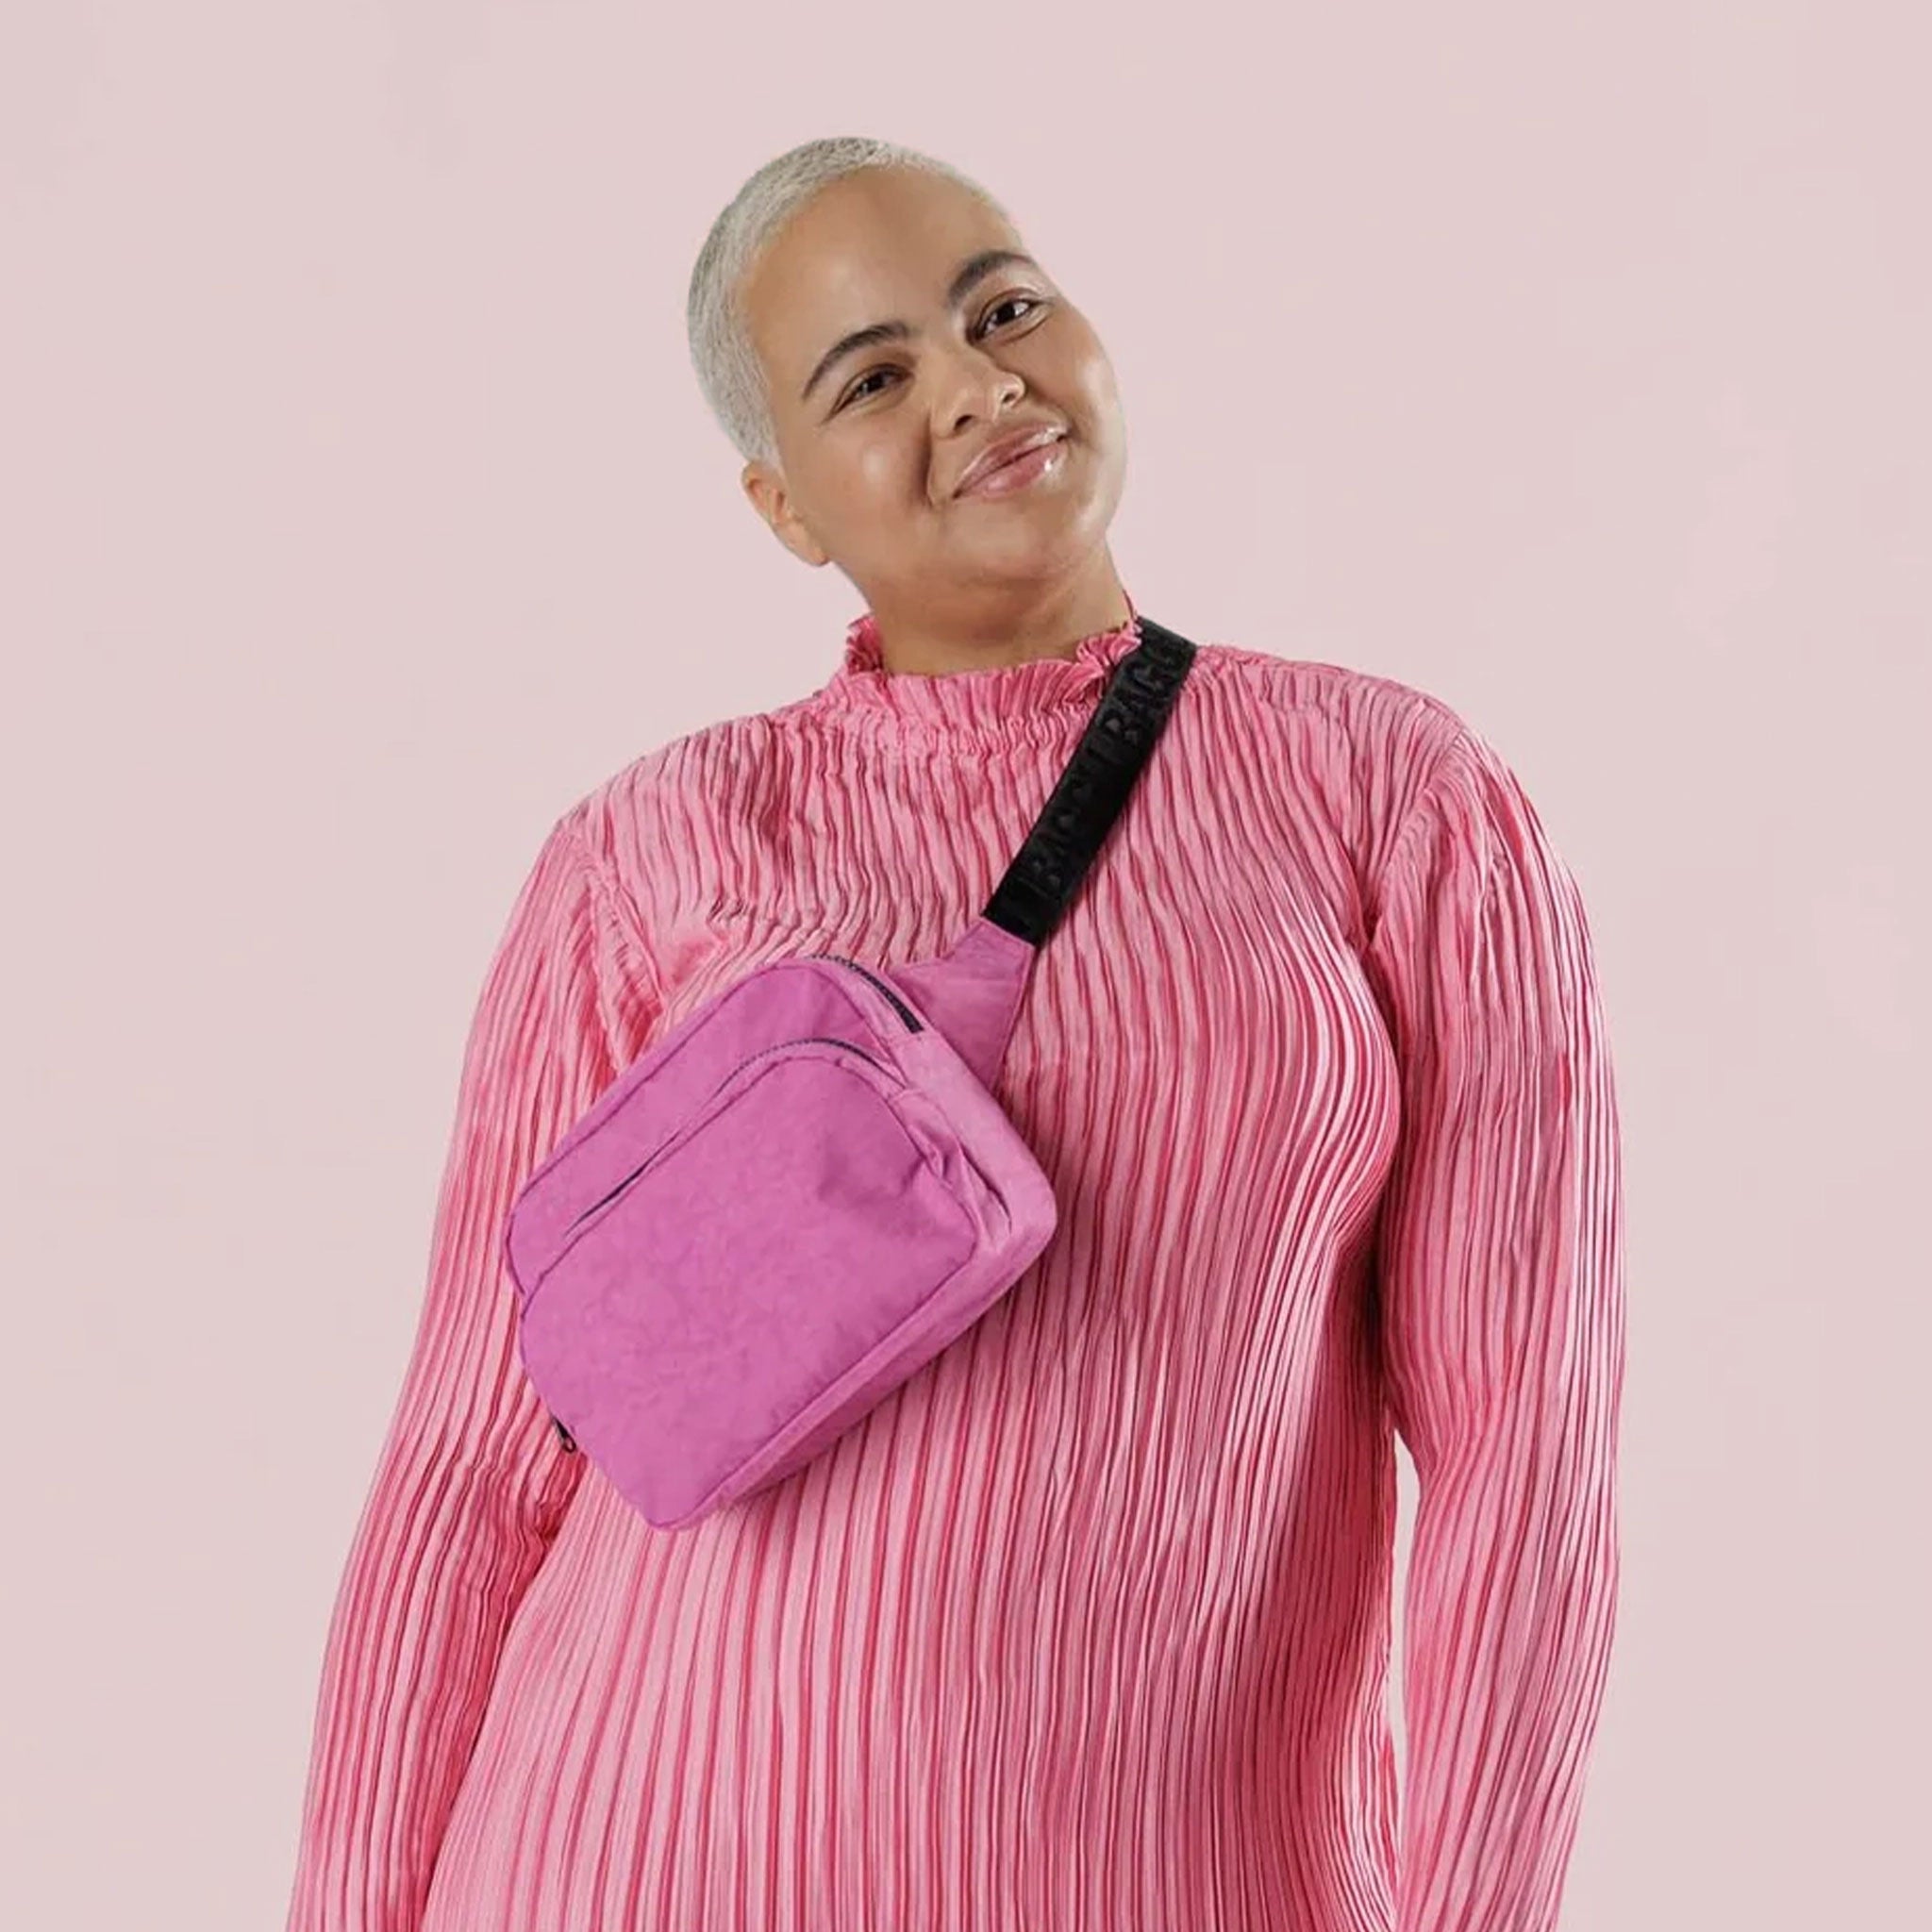 On a light pink background is a bright pink fanny pack with a black strap.